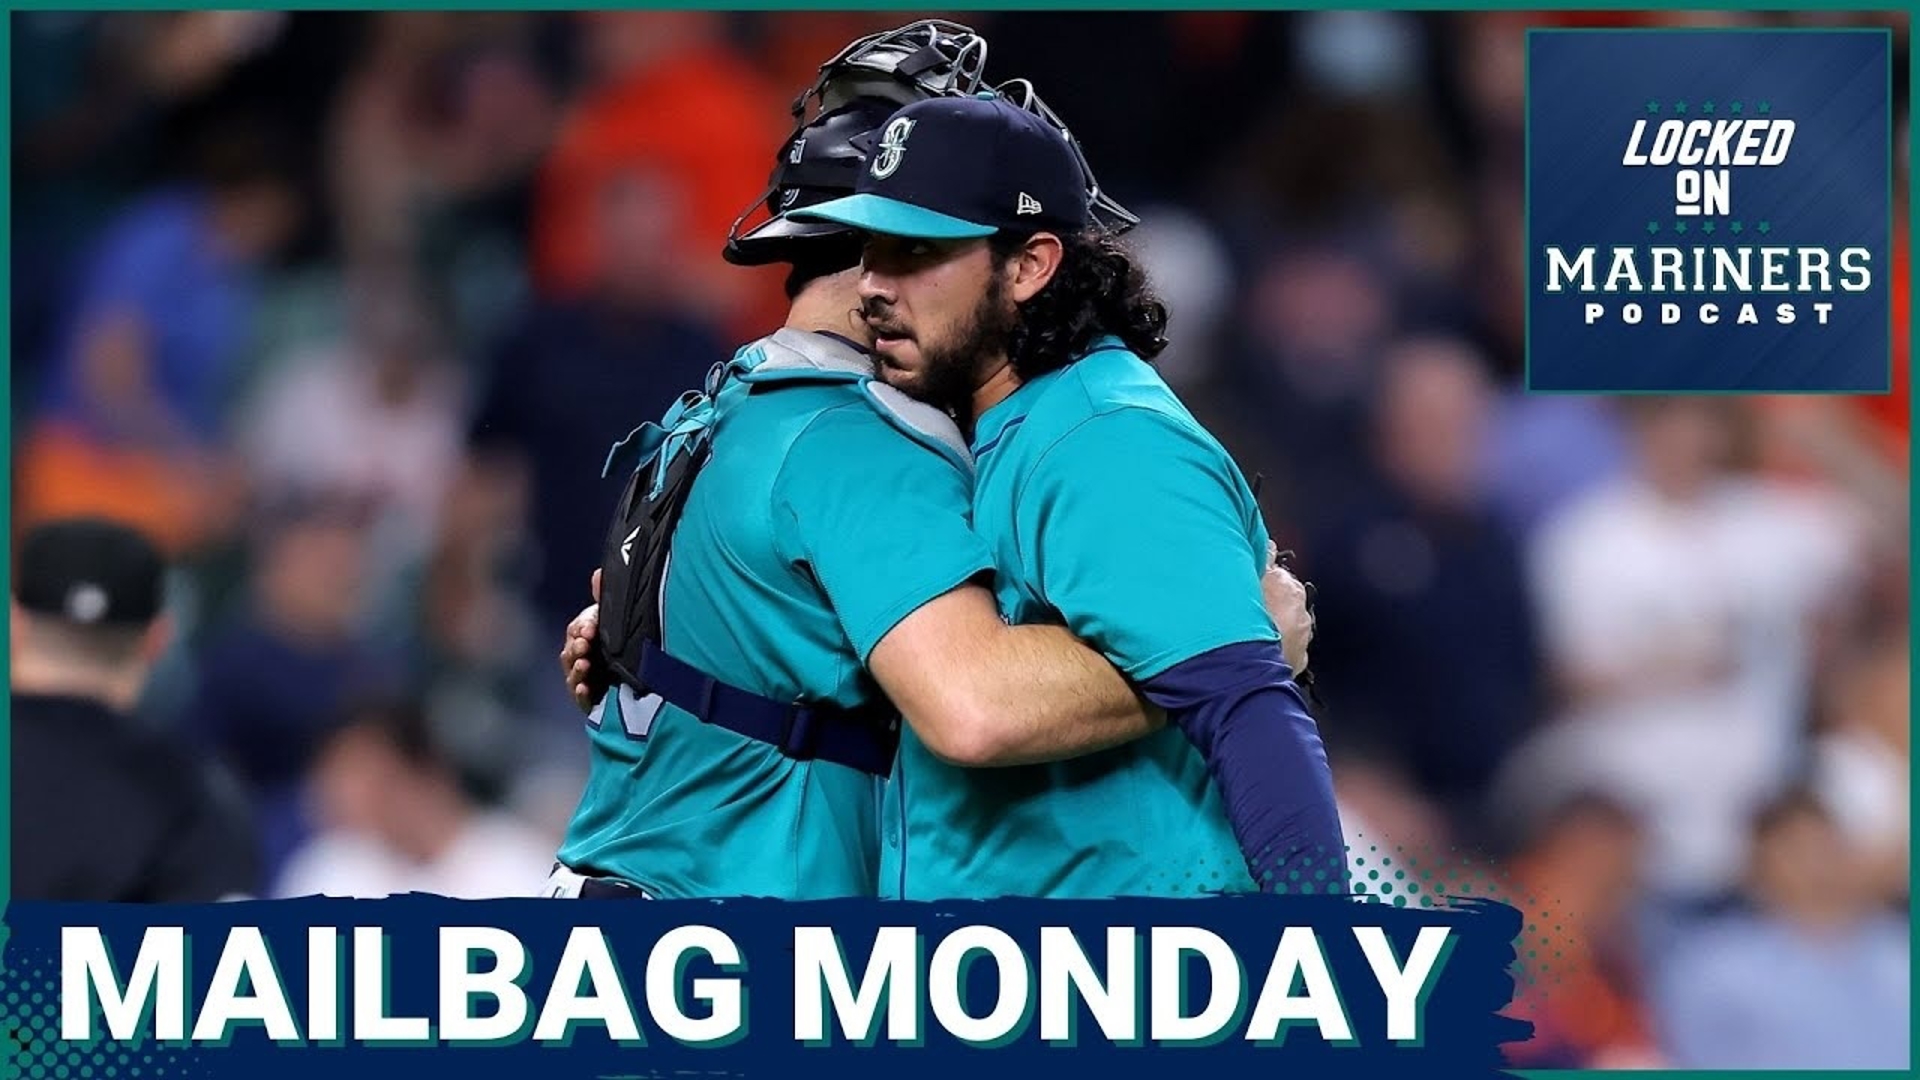 It's Mailbag Monday! Why is Julio Rodríguez still struggling? When Will Bryan Woo make his season debut? And do the Mariners need to go all-in on the 2024 season?